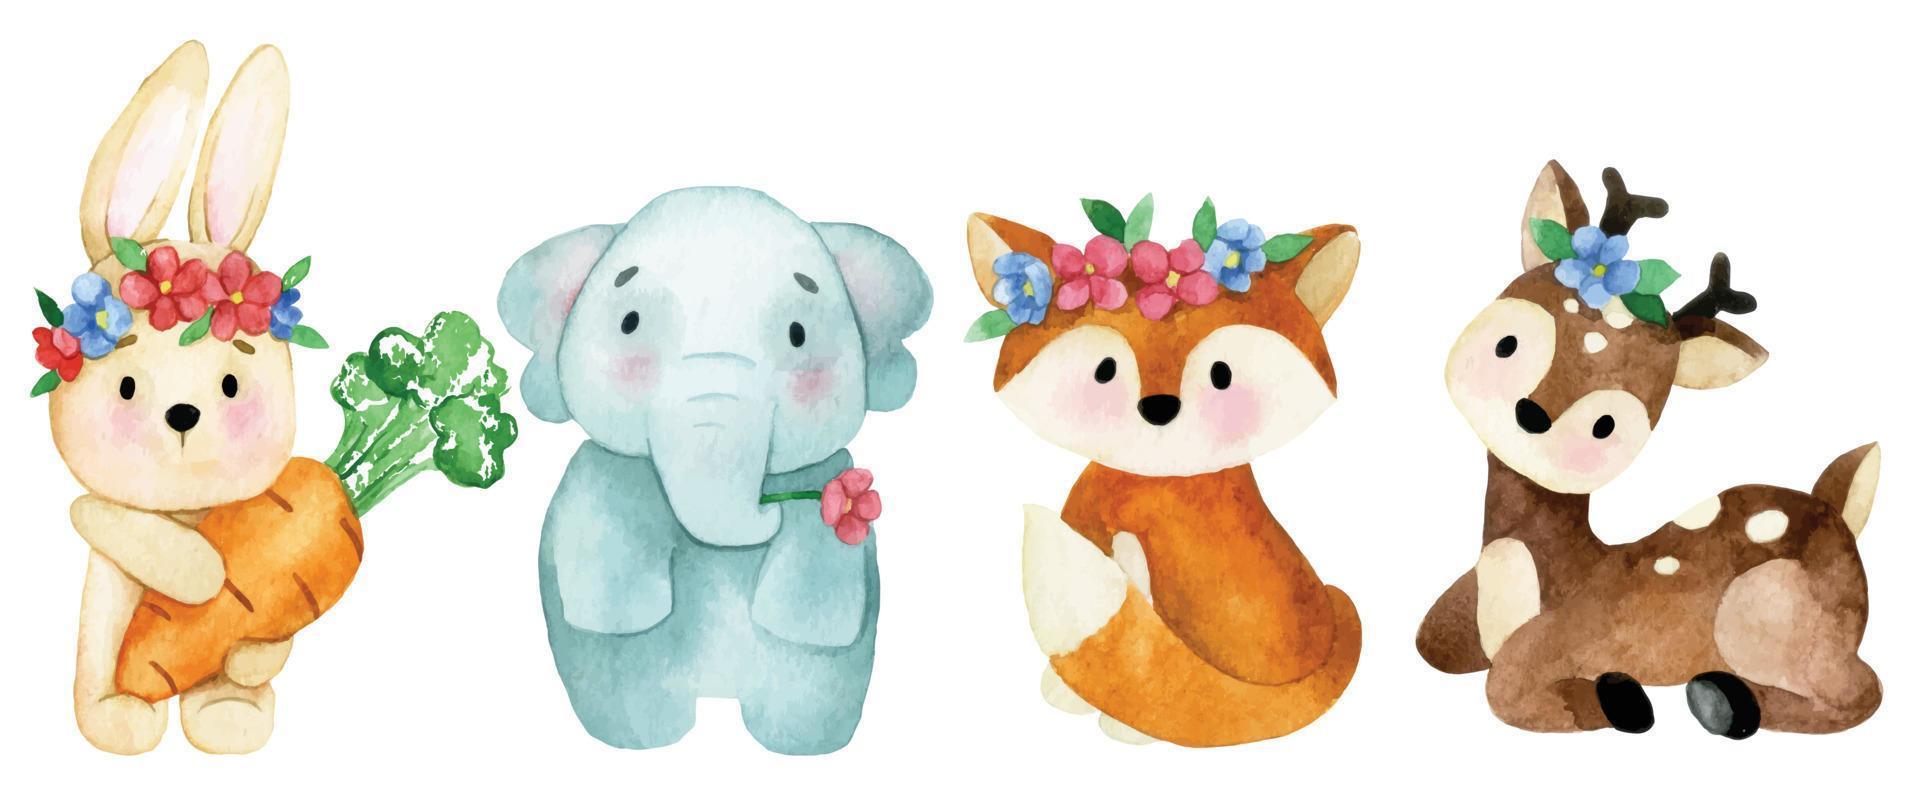 watercolor drawing. set of cute animals with flowers. characters for children rabbit, elephant, fox, deer. baby book scrapbooking vector